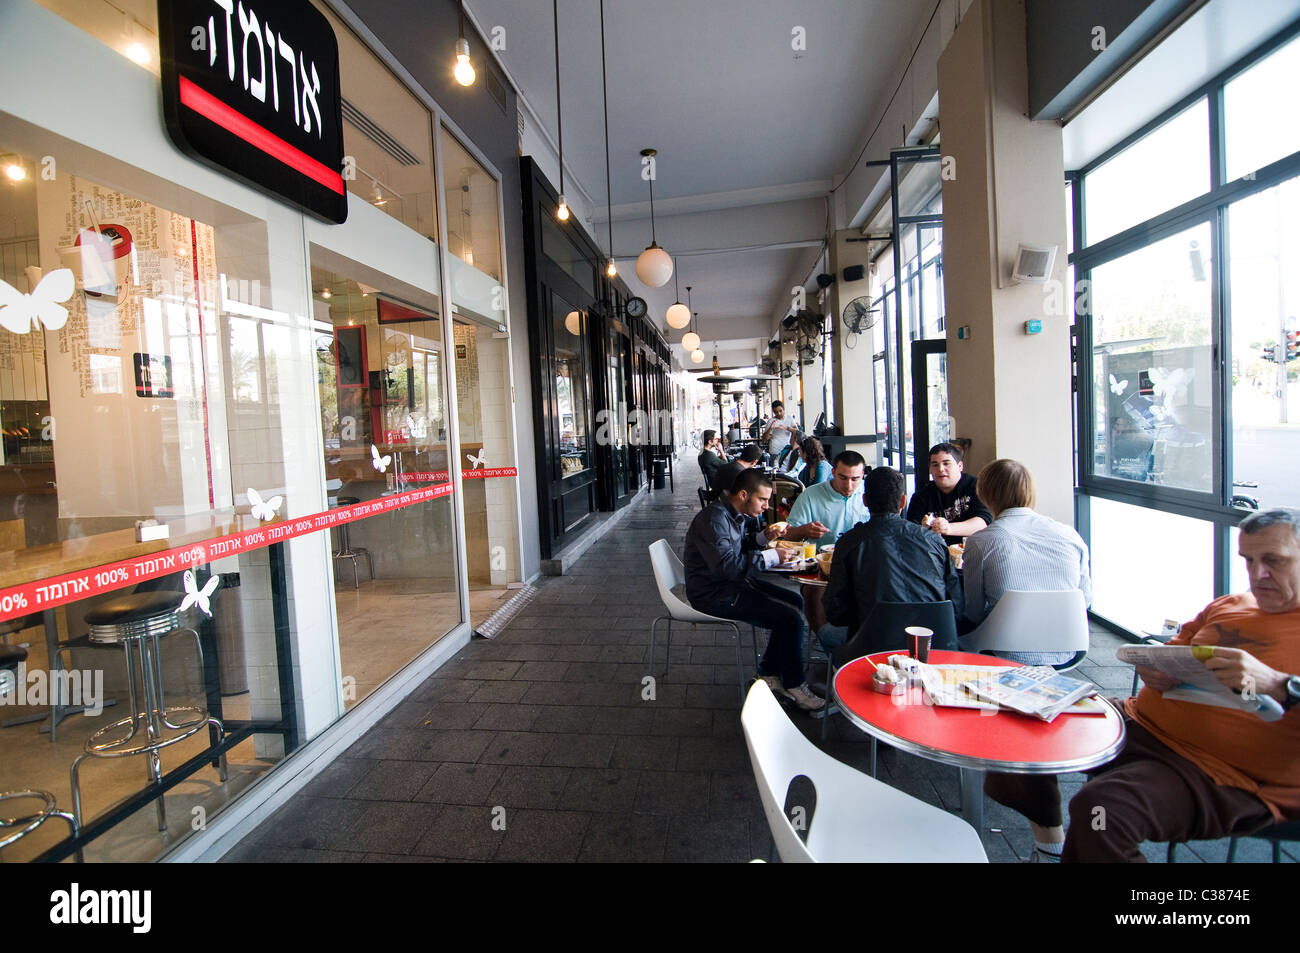 Aroma Espresso bar / cafe is very popular in Israel. Stock Photo